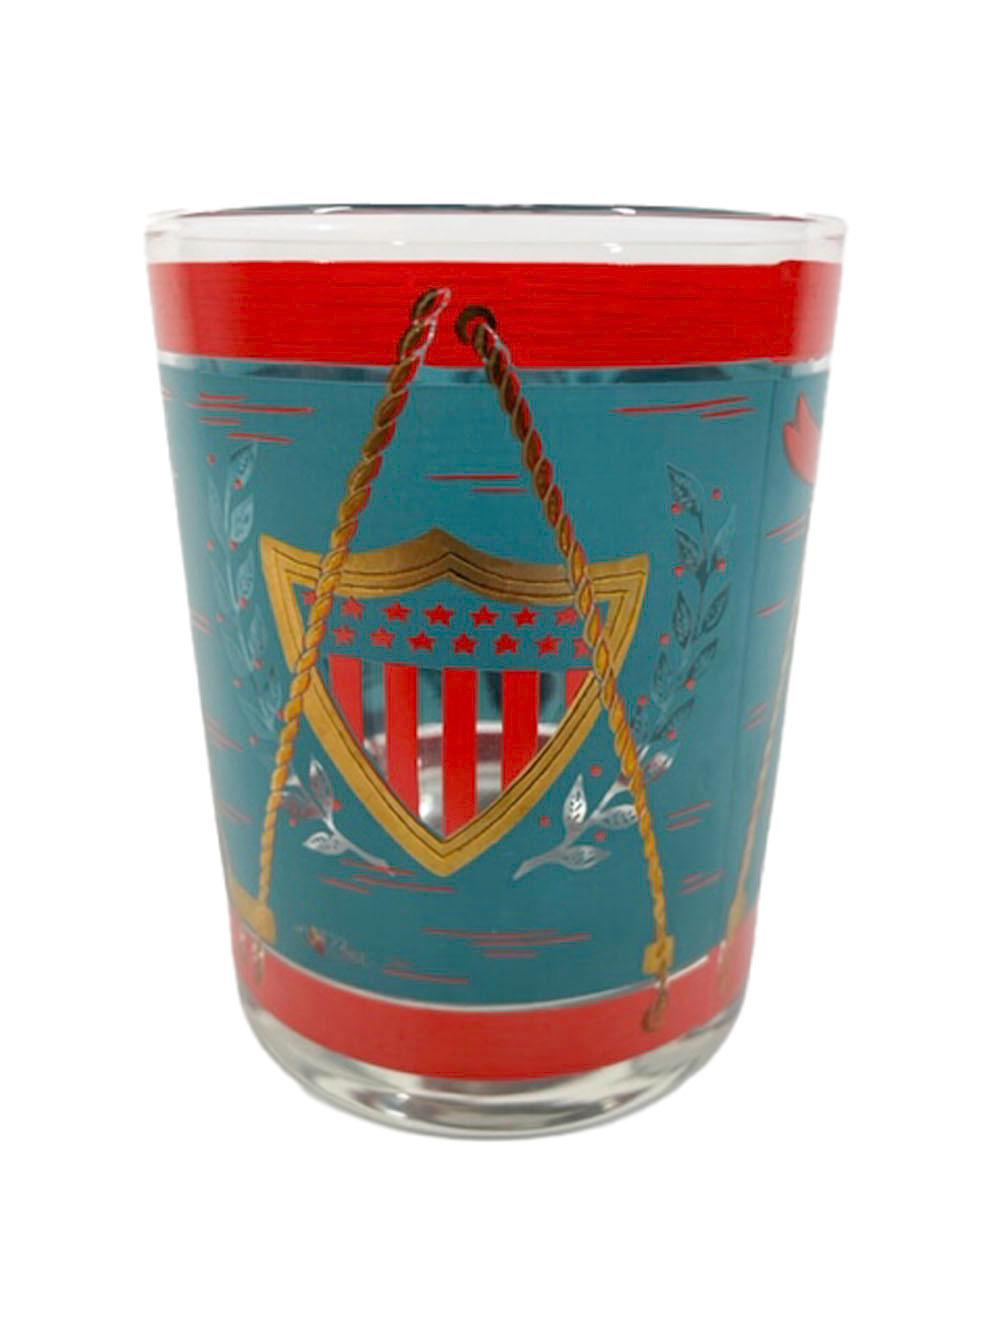 Mid-Century Modern Vintage Cera Glassware Rocks Glasses in Teal and Red Drum Pattern w/Gold Eagle